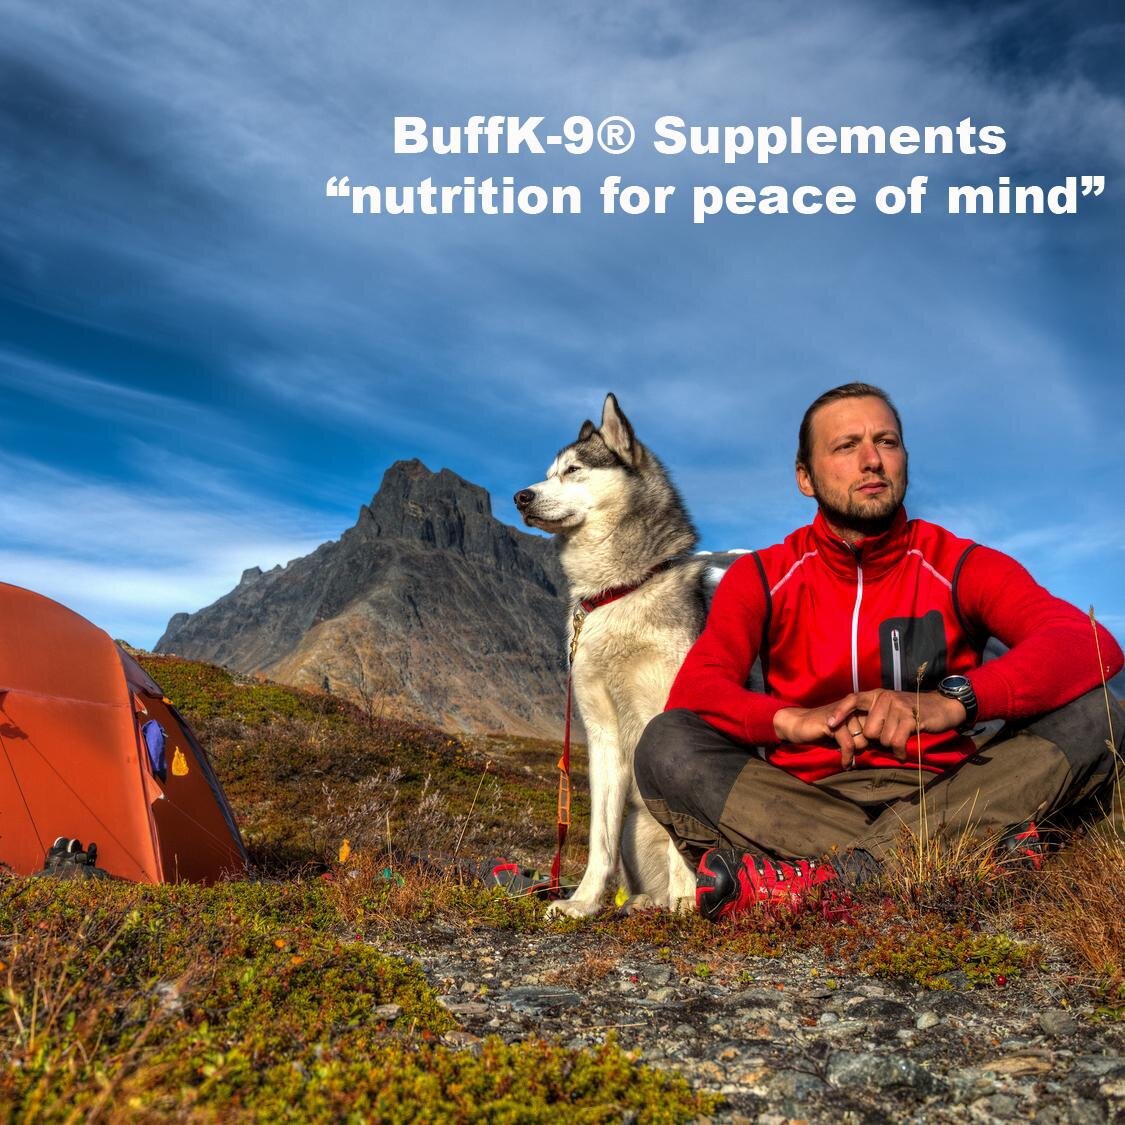 nutritionist in OC. specializing in sports, herbs, weight loss, anti aging and dog lover.